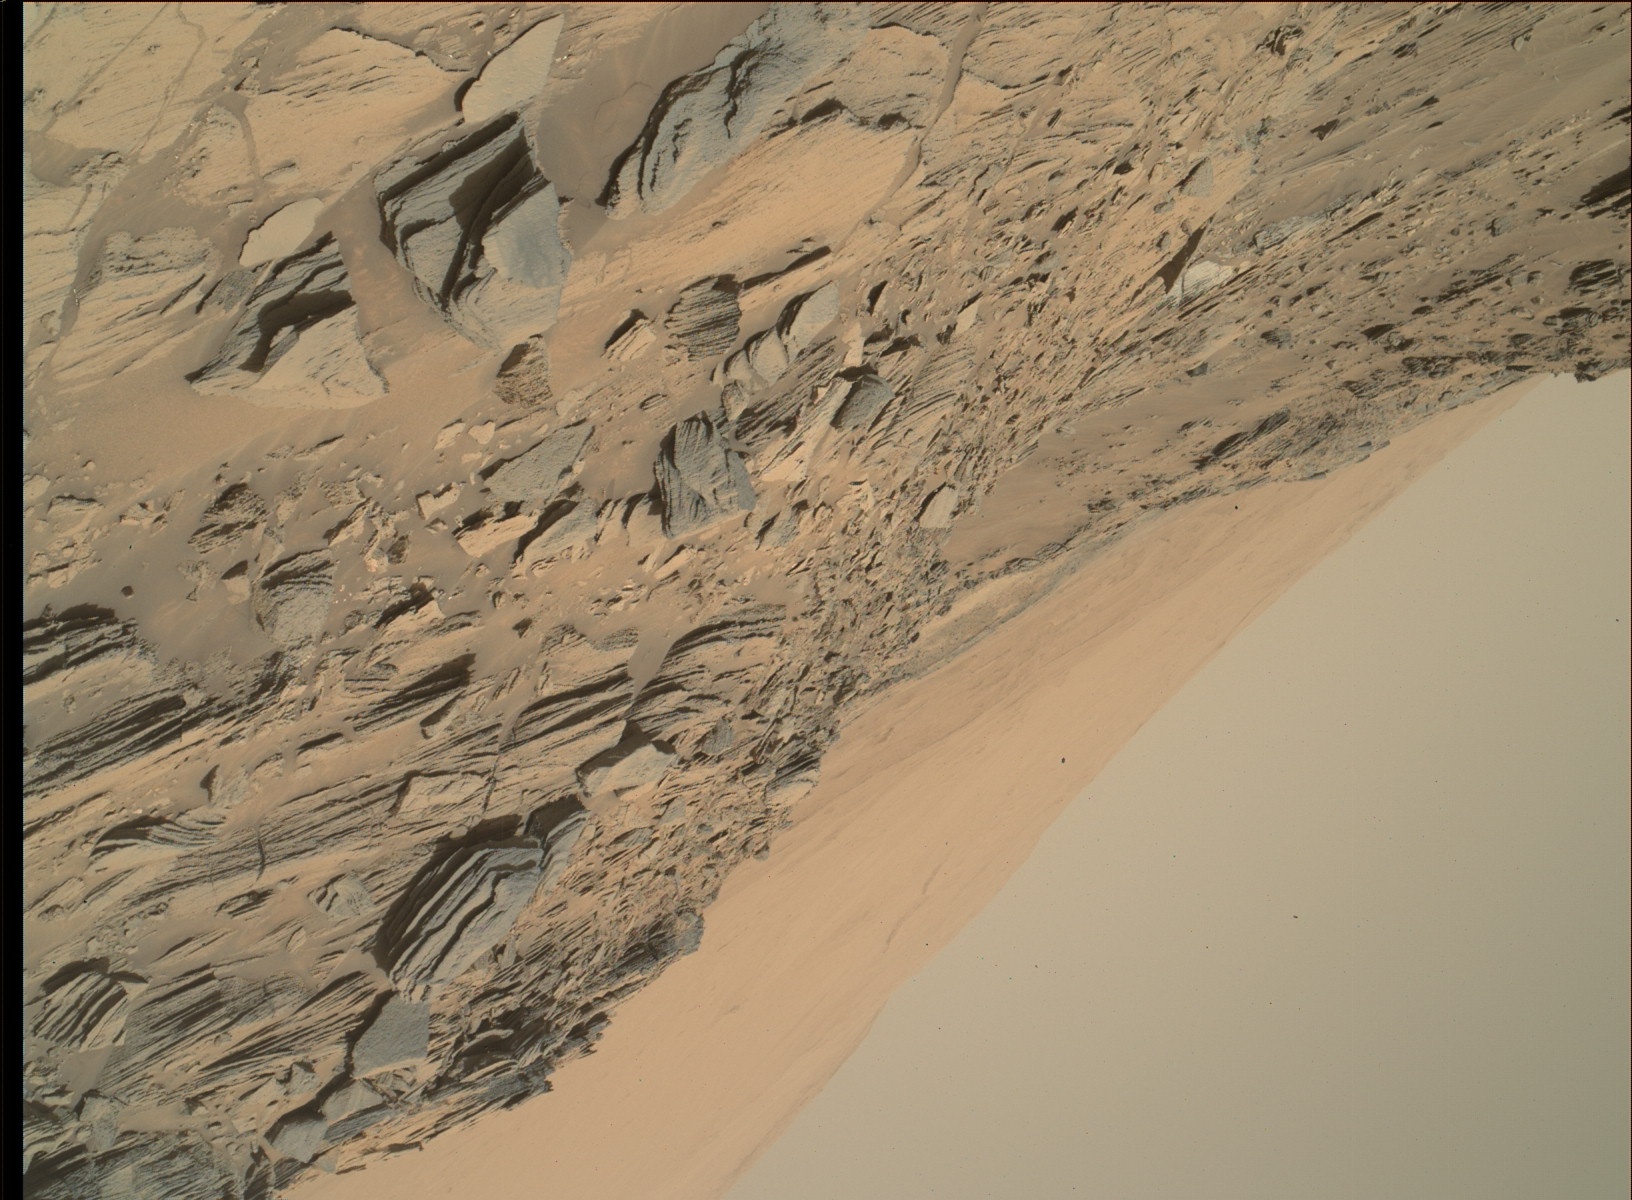 Nasa's Mars rover Curiosity acquired this image using its Mars Hand Lens Imager (MAHLI) on Sol 1072